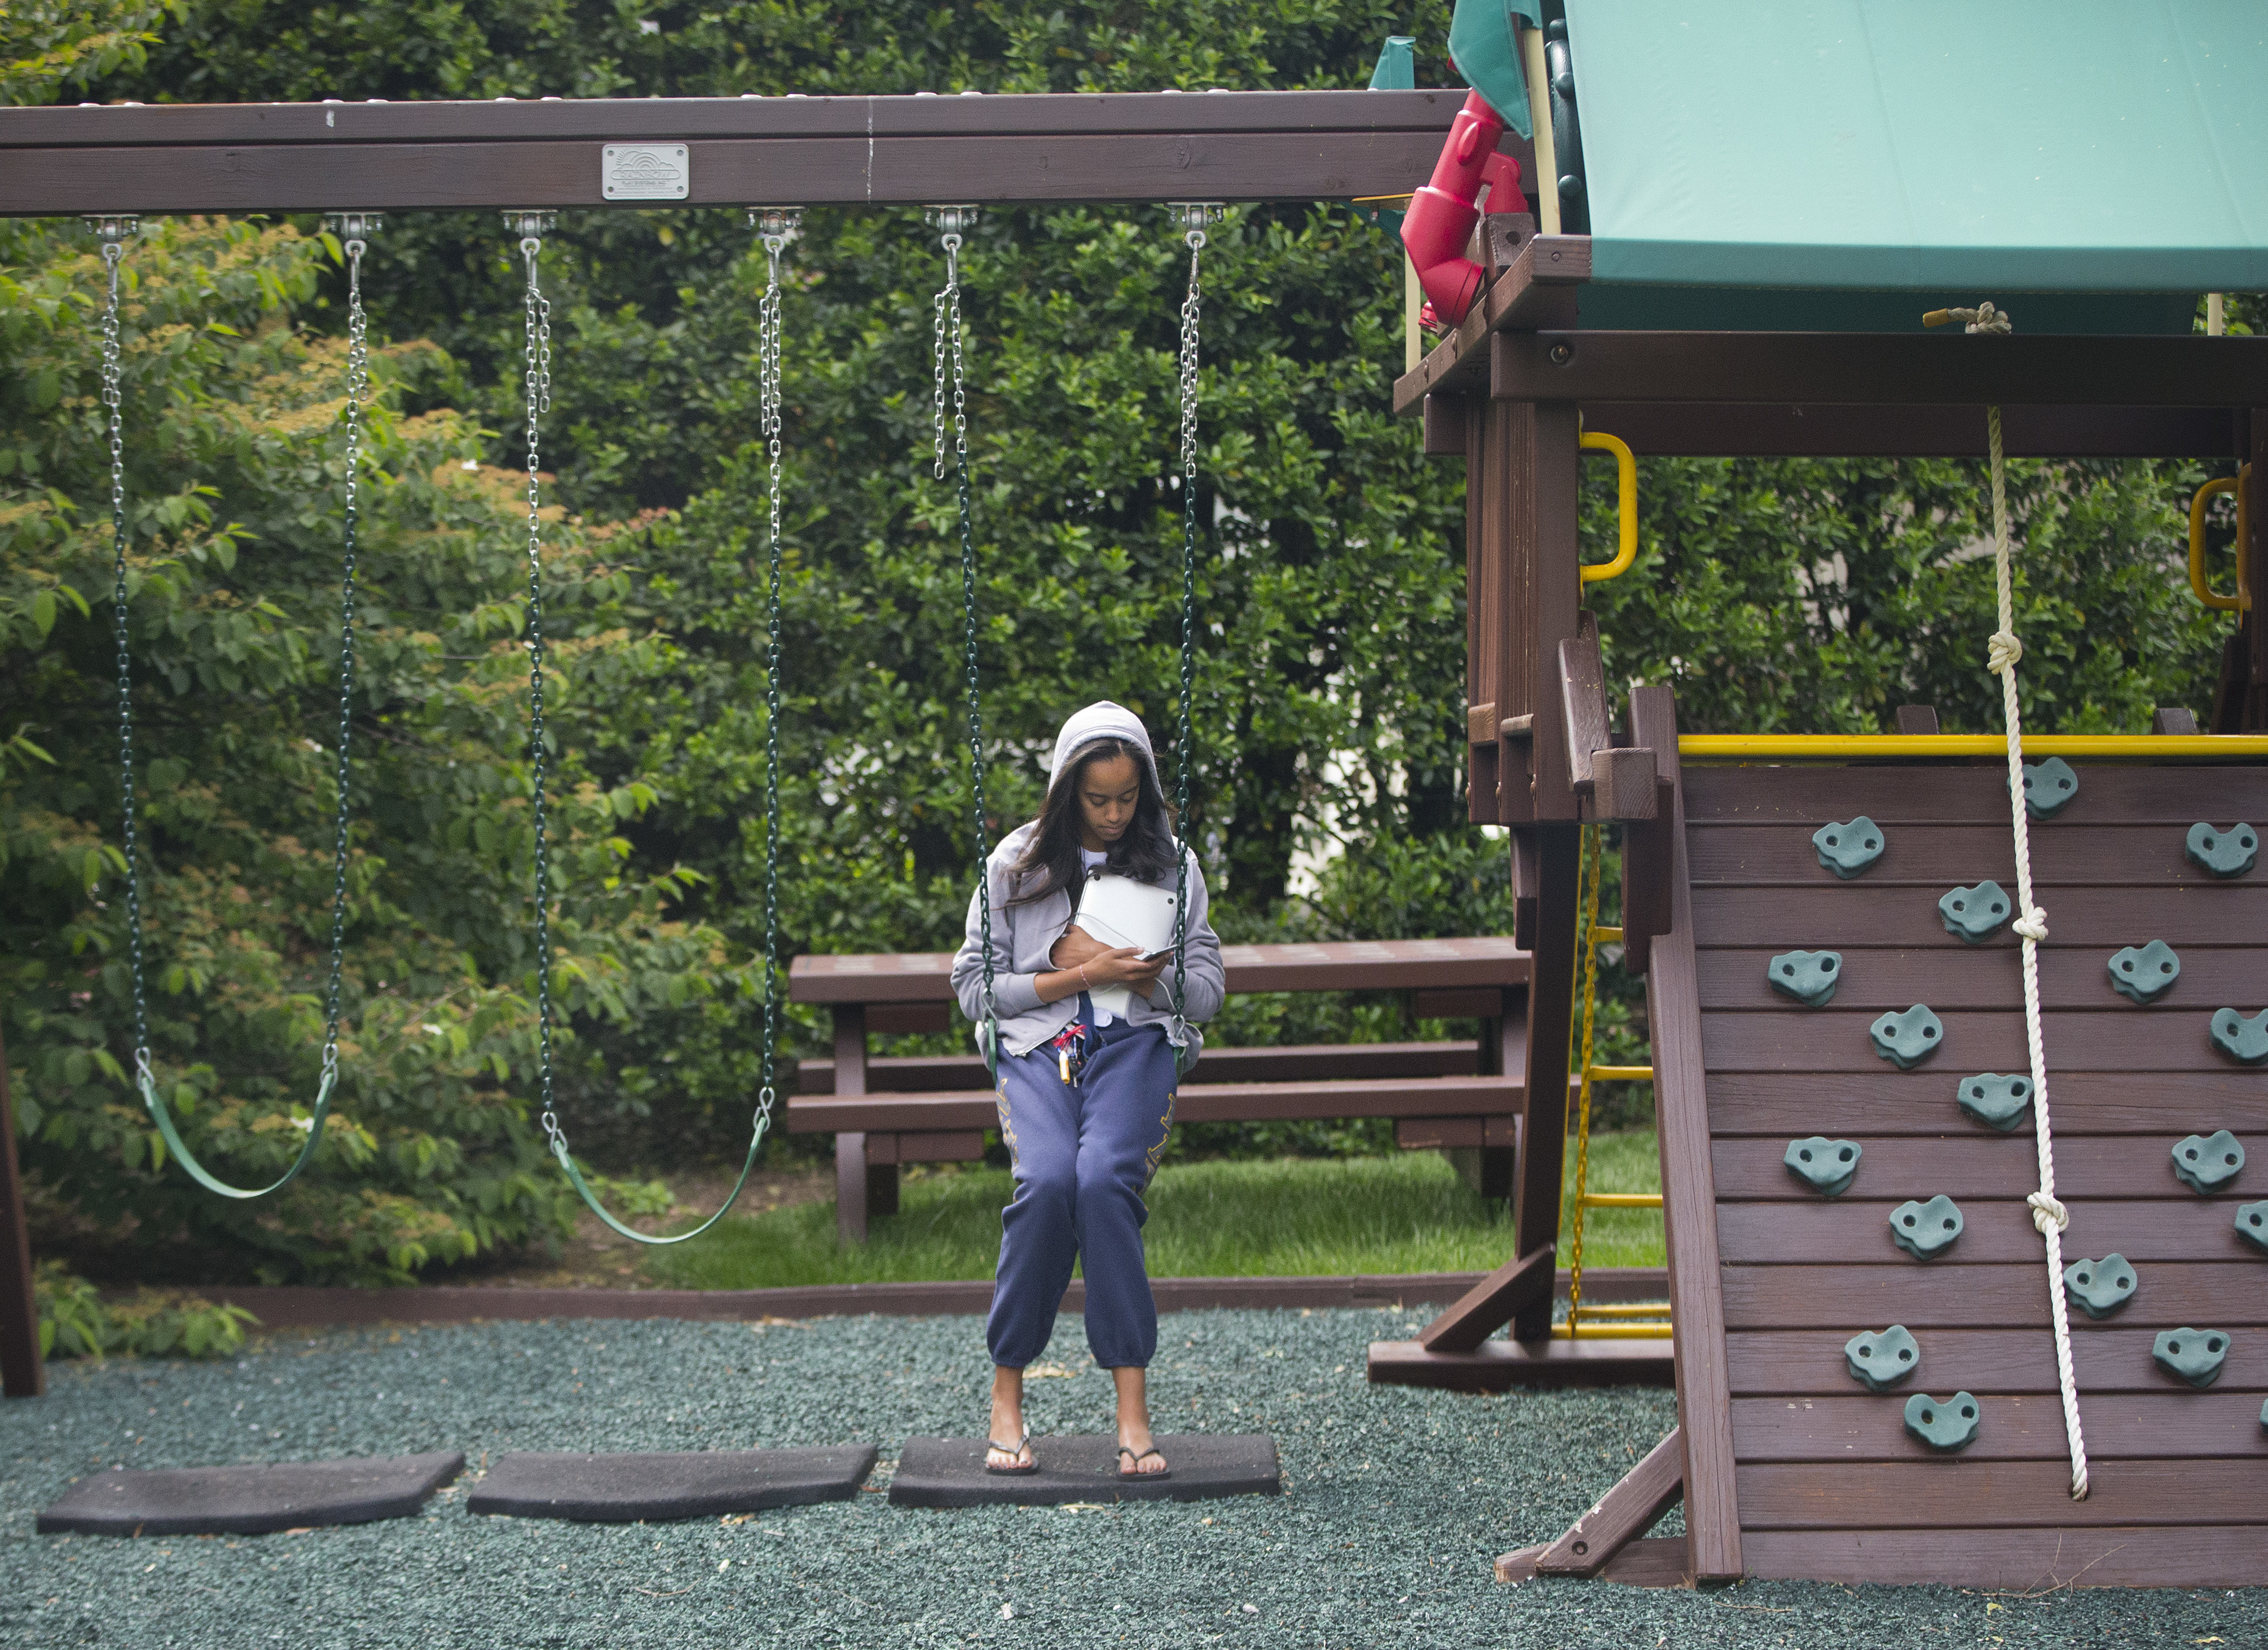 FILE - In this May 18, 2016 file photo, Malia Obama uses her phone at the swing and play set on the south grounds of the White House outside of the Oval Office in Washington. The swing set that President Barack Obama installed on the South Lawn for his young daughters eight years ago has a new home. The White House says the Obamas donated the set to a shelter in southeast Washington. The Obamas are planning to visit the Jobs Have Priority Naylor Road Program and join residents for a service project Monday in honor of Martin Luther King Jr. Day. (AP Photo/Pablo Martinez Monsivais, File)